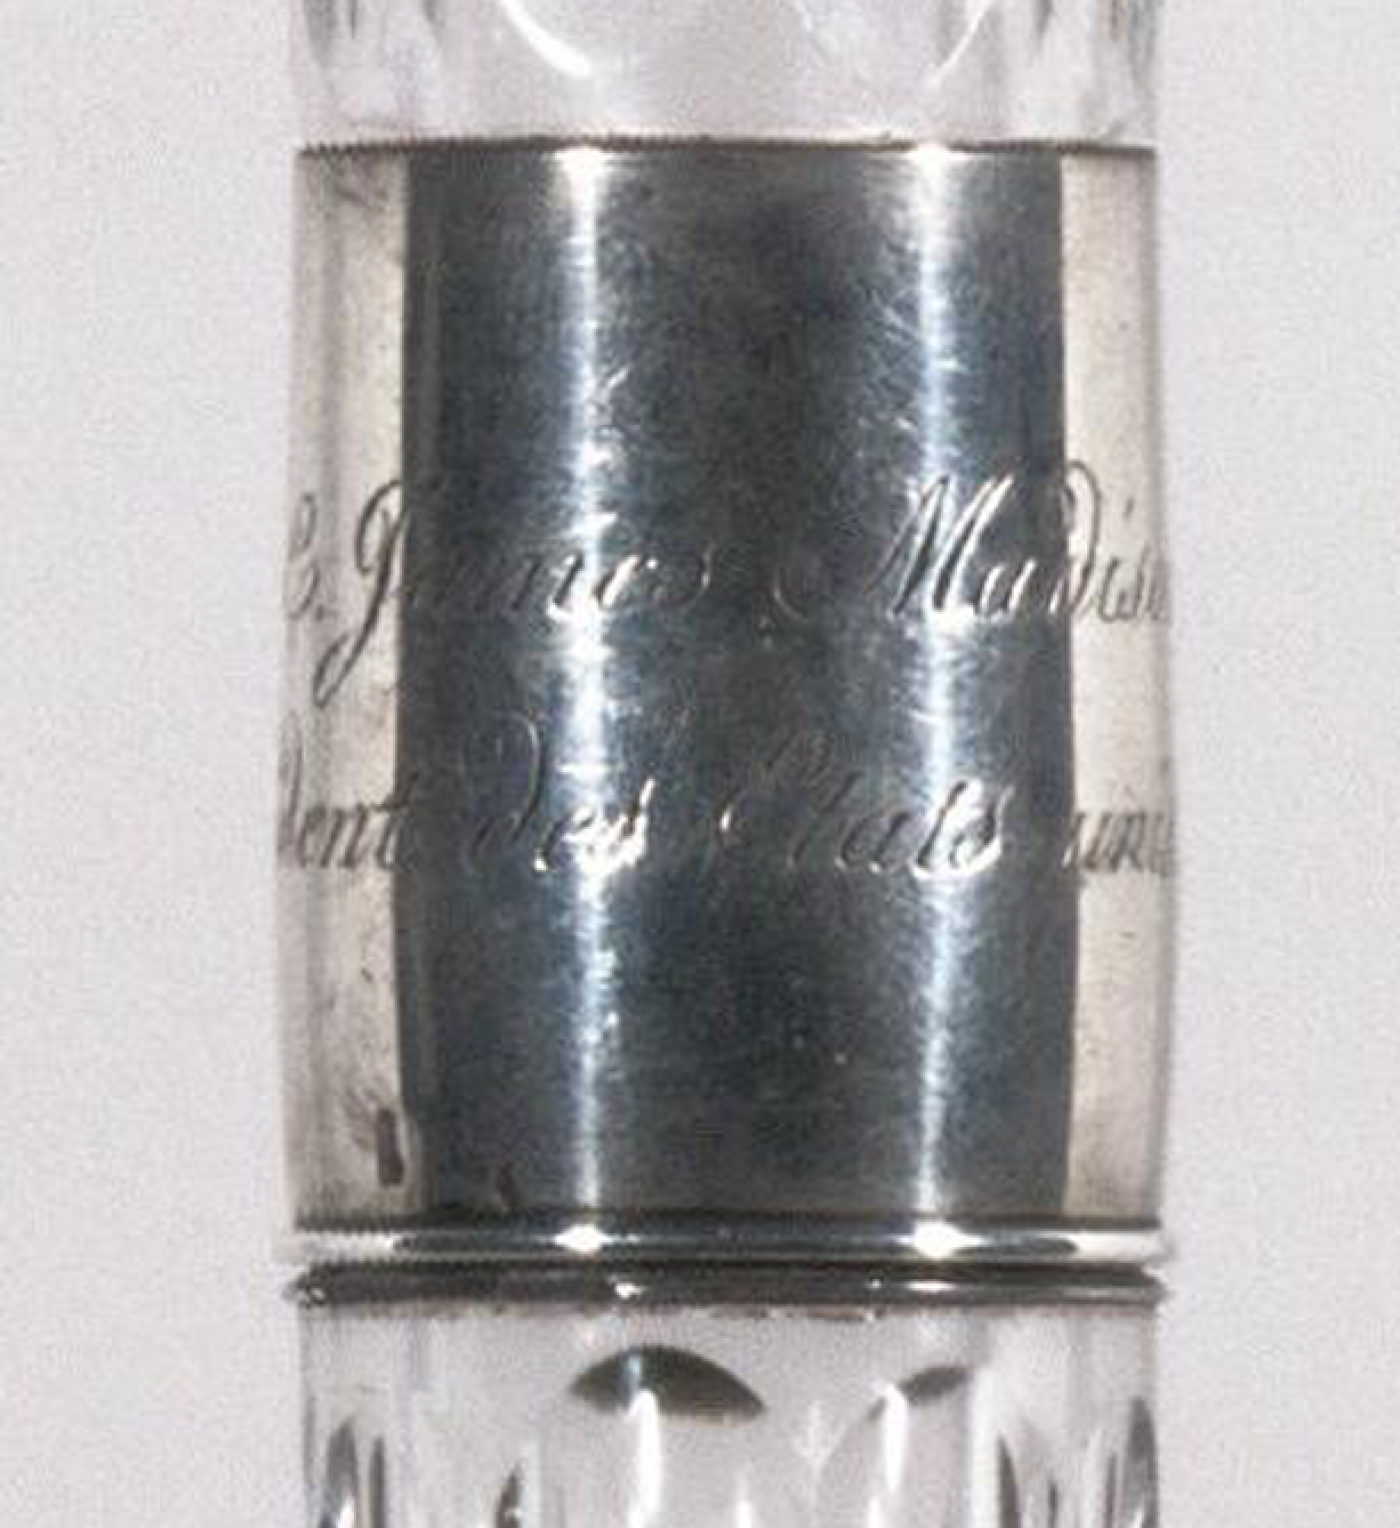 The silver joint is engraved with Madison’s name, title, and the year of its manufacture, 1813